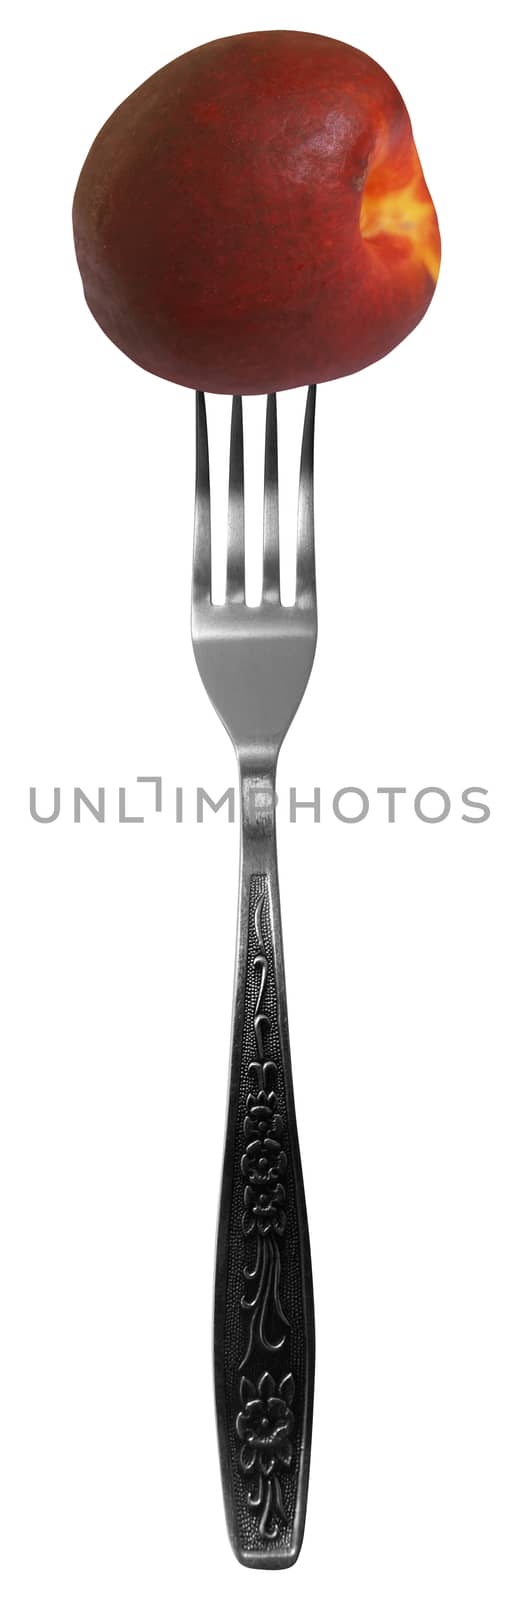 Peach on fork isolated on a white background.